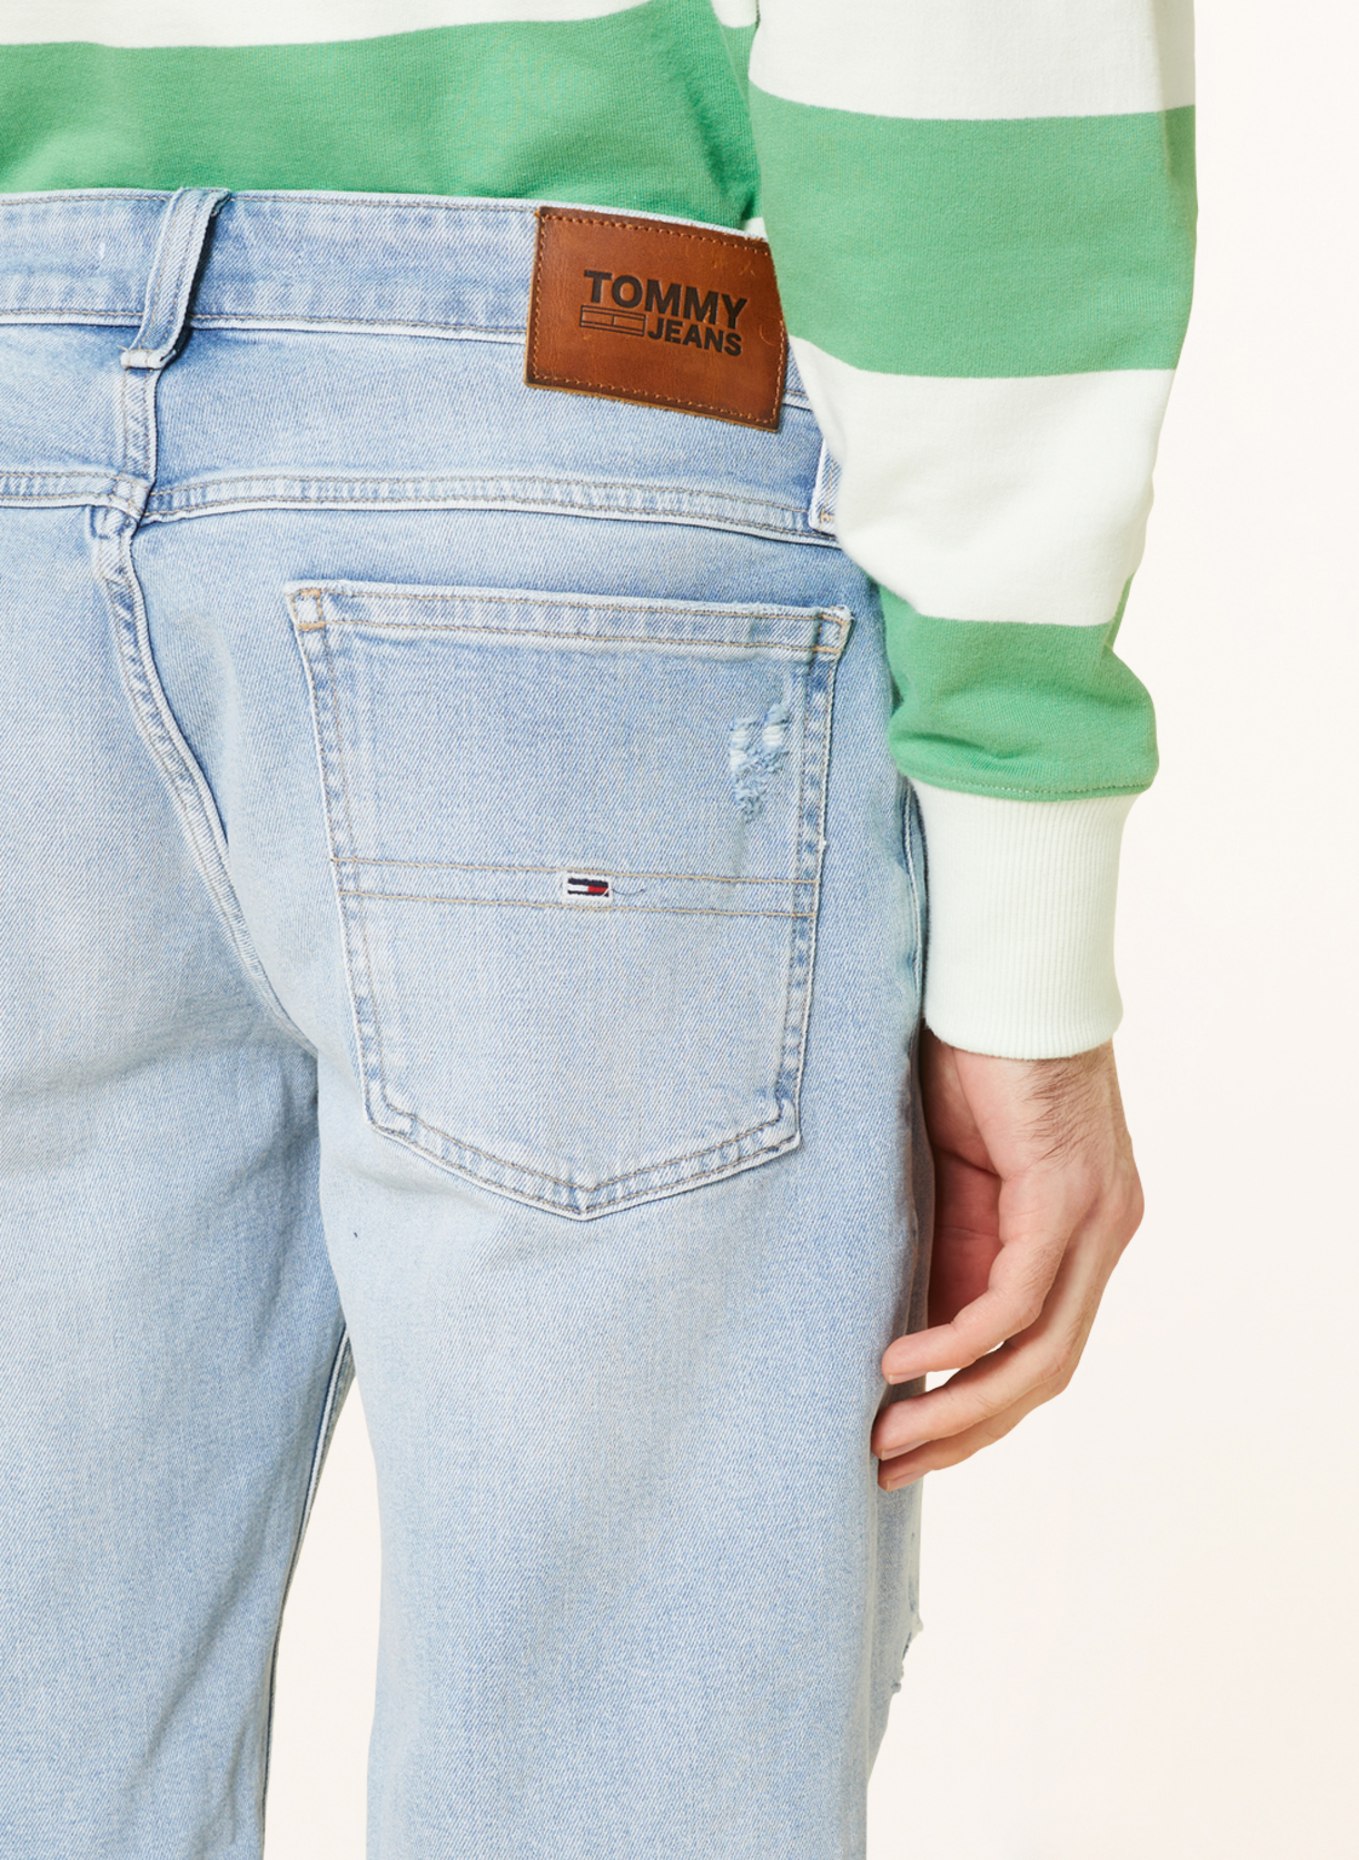 TOMMY JEANS Jeansshorts RONNIE Relaxed Fit, Farbe: 1AB Denim Light (Bild 6)